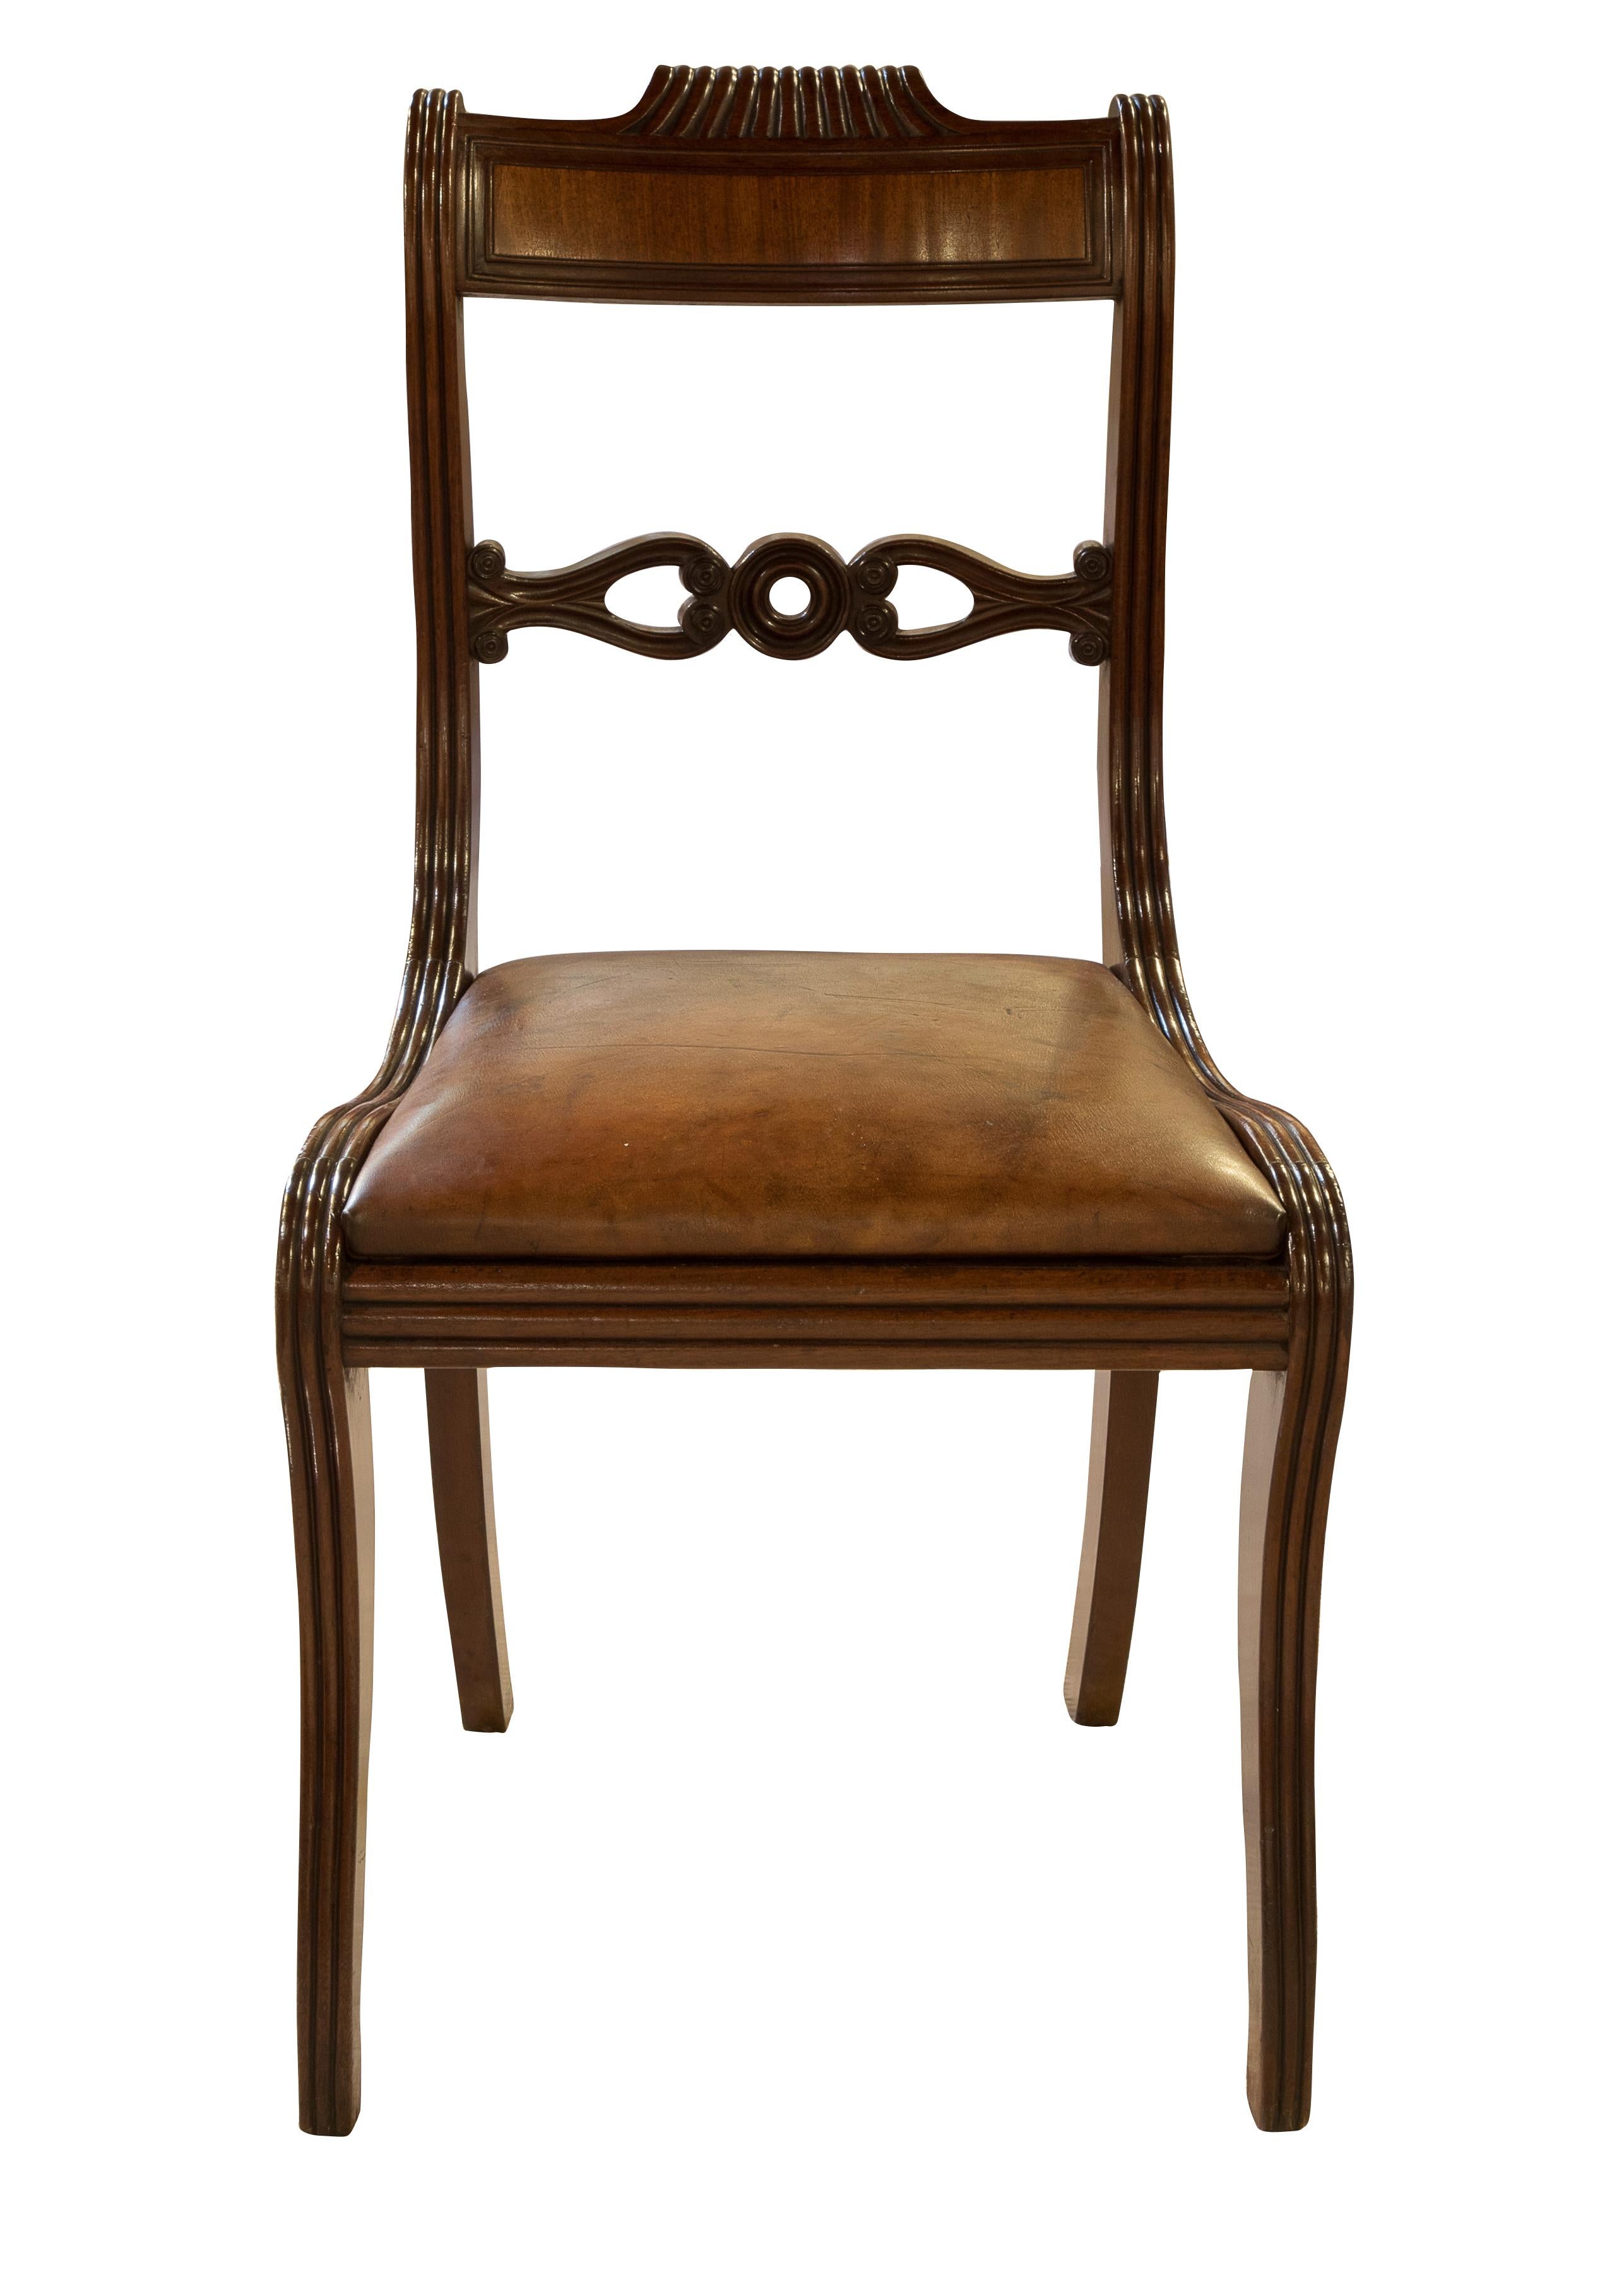 Regency mahogany chair with leather upholstered seat,


circa 1830.